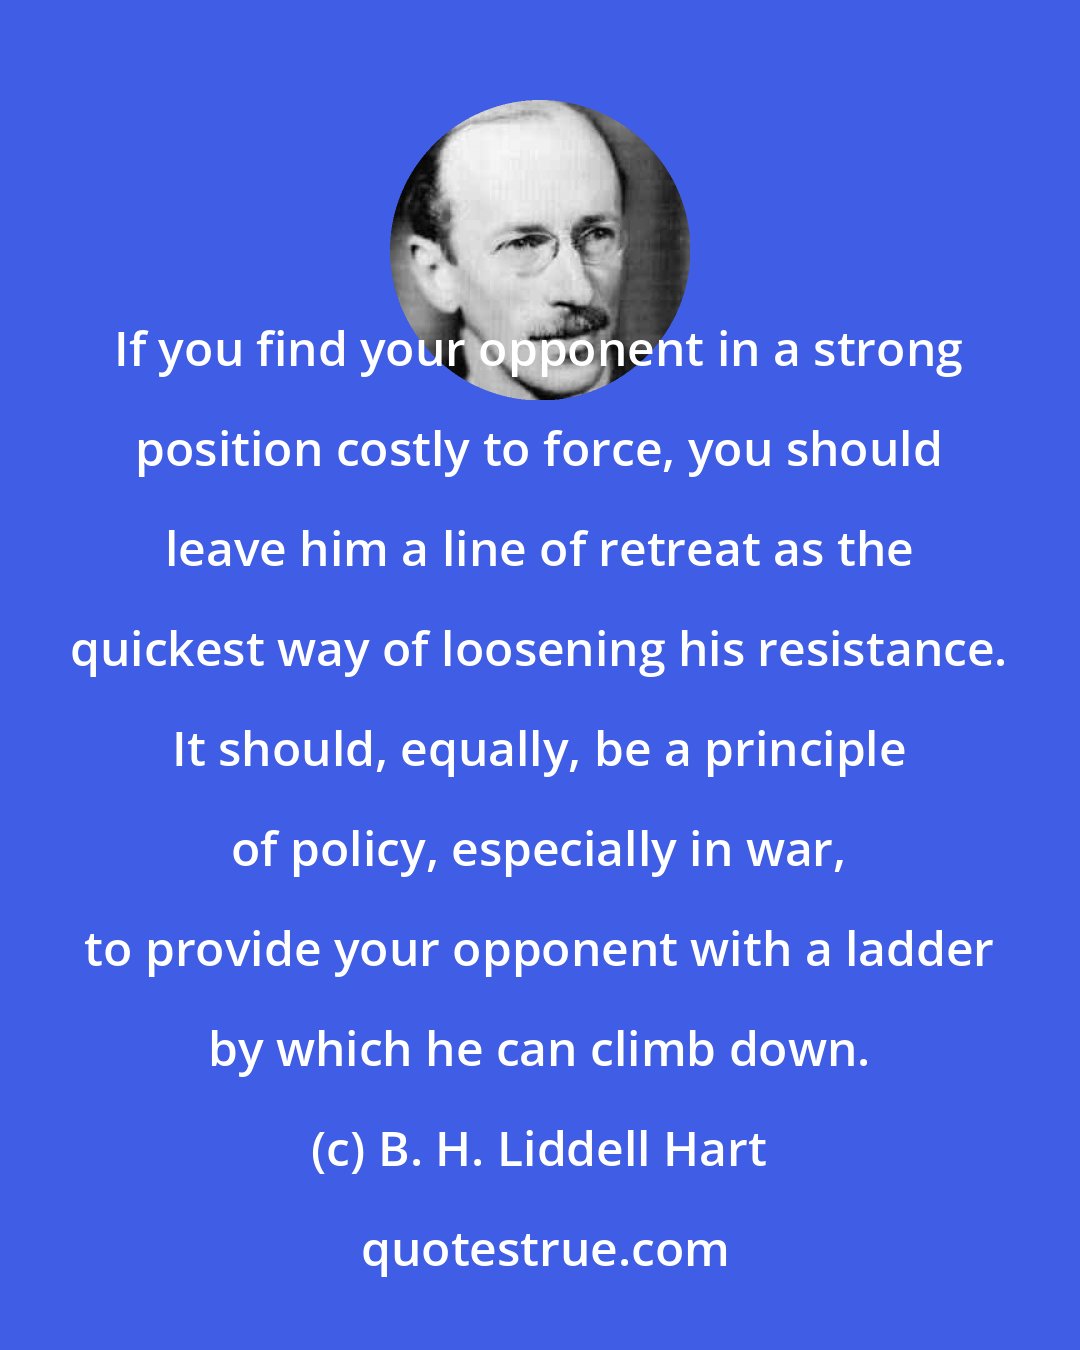 B. H. Liddell Hart: If you find your opponent in a strong position costly to force, you should leave him a line of retreat as the quickest way of loosening his resistance. It should, equally, be a principle of policy, especially in war, to provide your opponent with a ladder by which he can climb down.